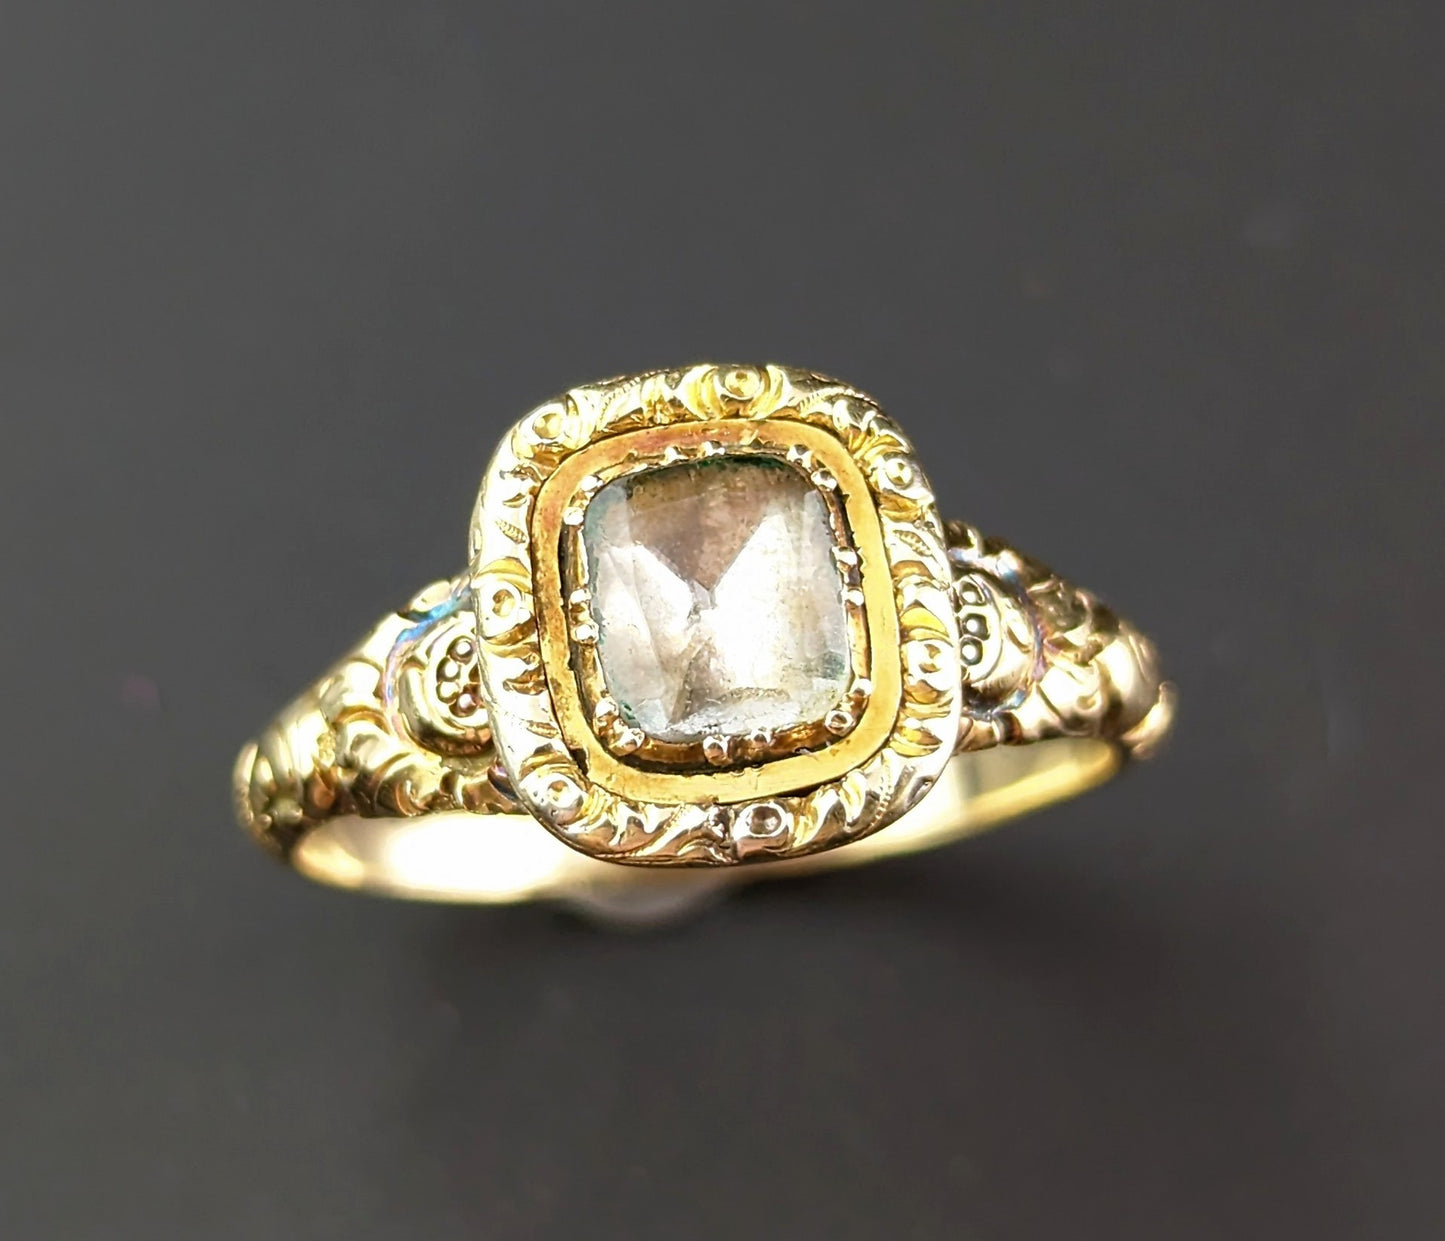 Antique Georgian foiled Quartz ring, 12ct gold, Chased and engraved